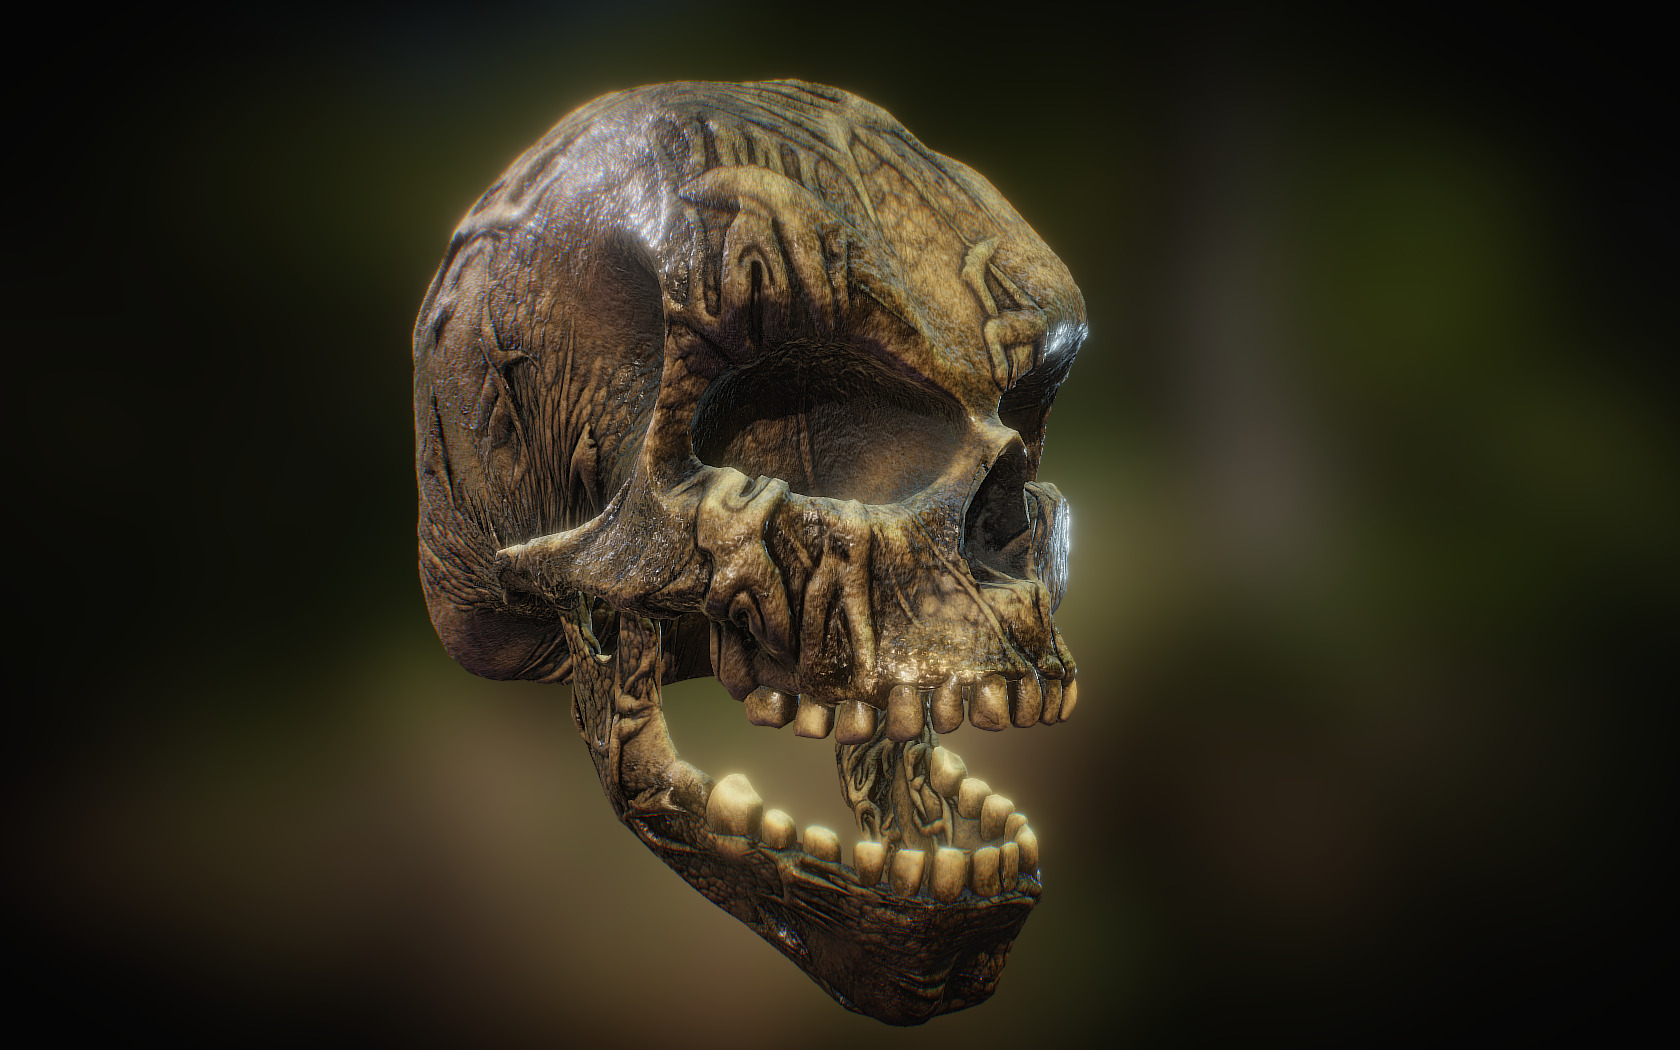 Testing a New Texture Generator on my Old Skull Model. Just a Proof of Concept to see how well the Displacement Maps work on a Organic Model. Modeled in Zbrush and Textured in Substance Painter 3d model